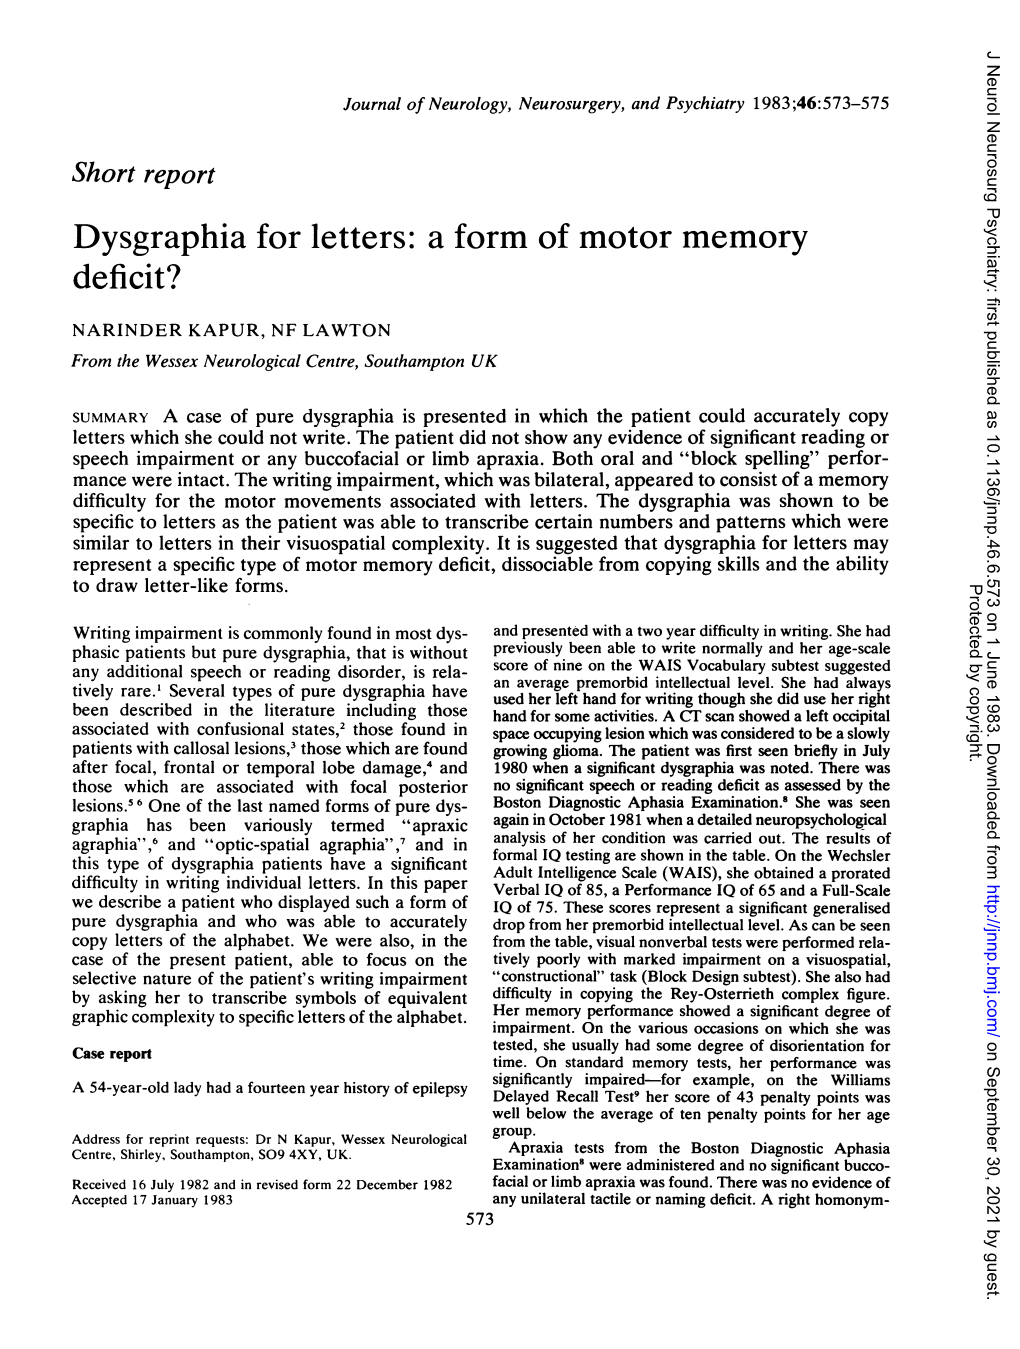 Dysgraphia for Letters: a Form of Motor Memory Deficit?